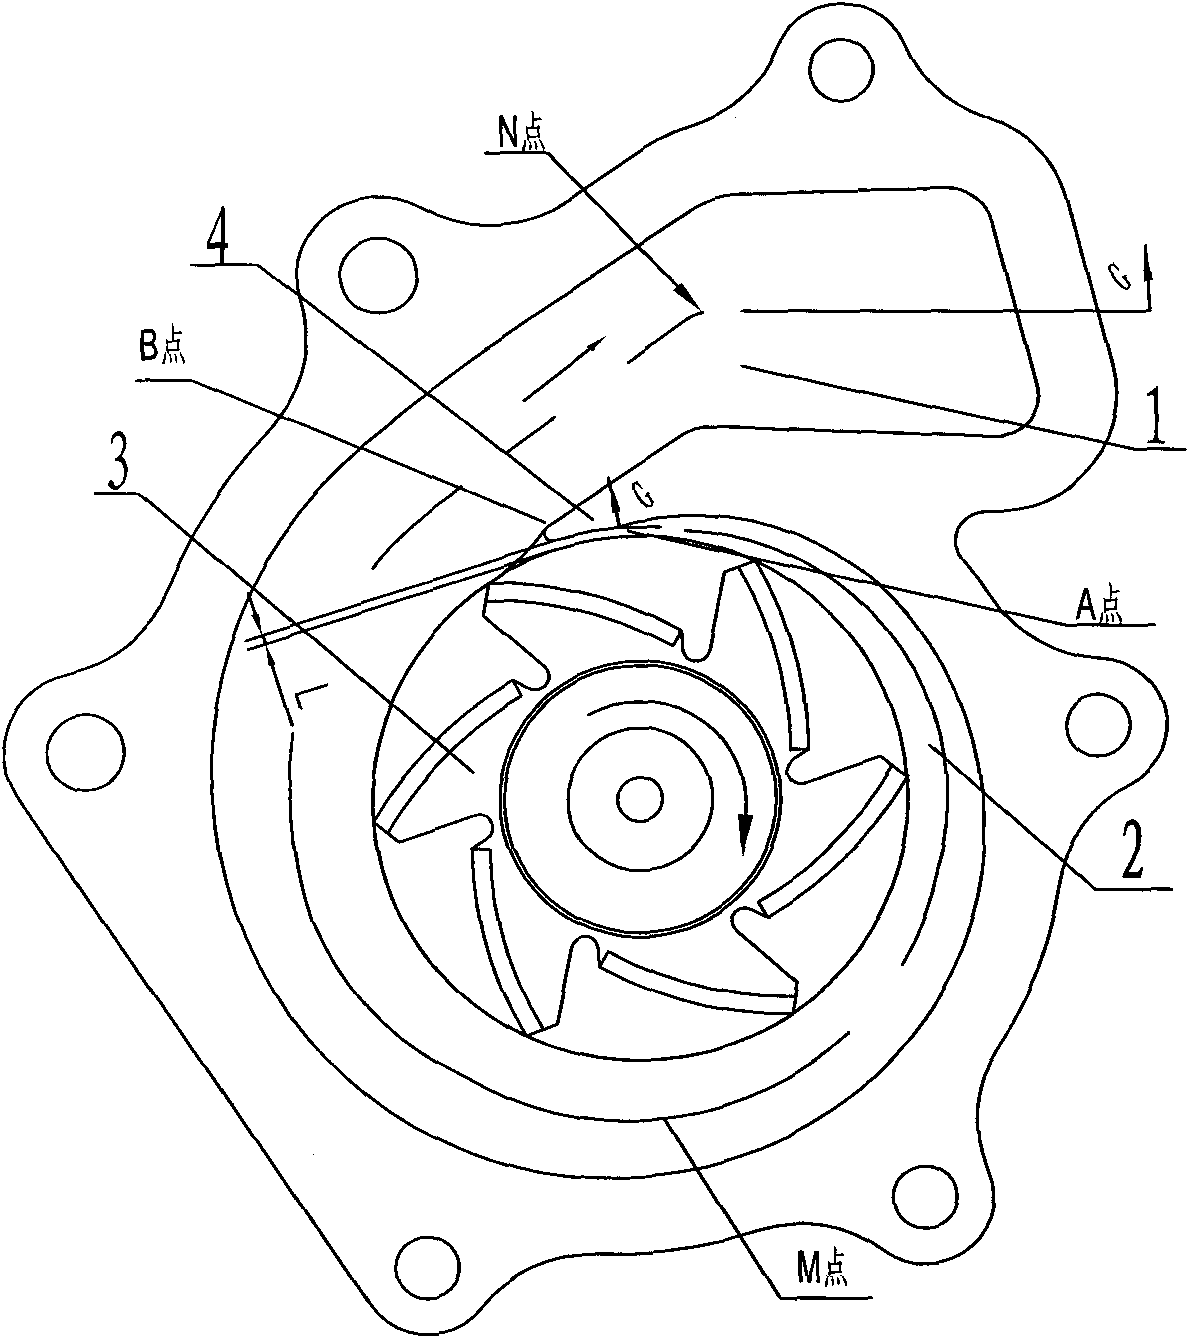 Helical water pump volute chamber structure of engine water pump